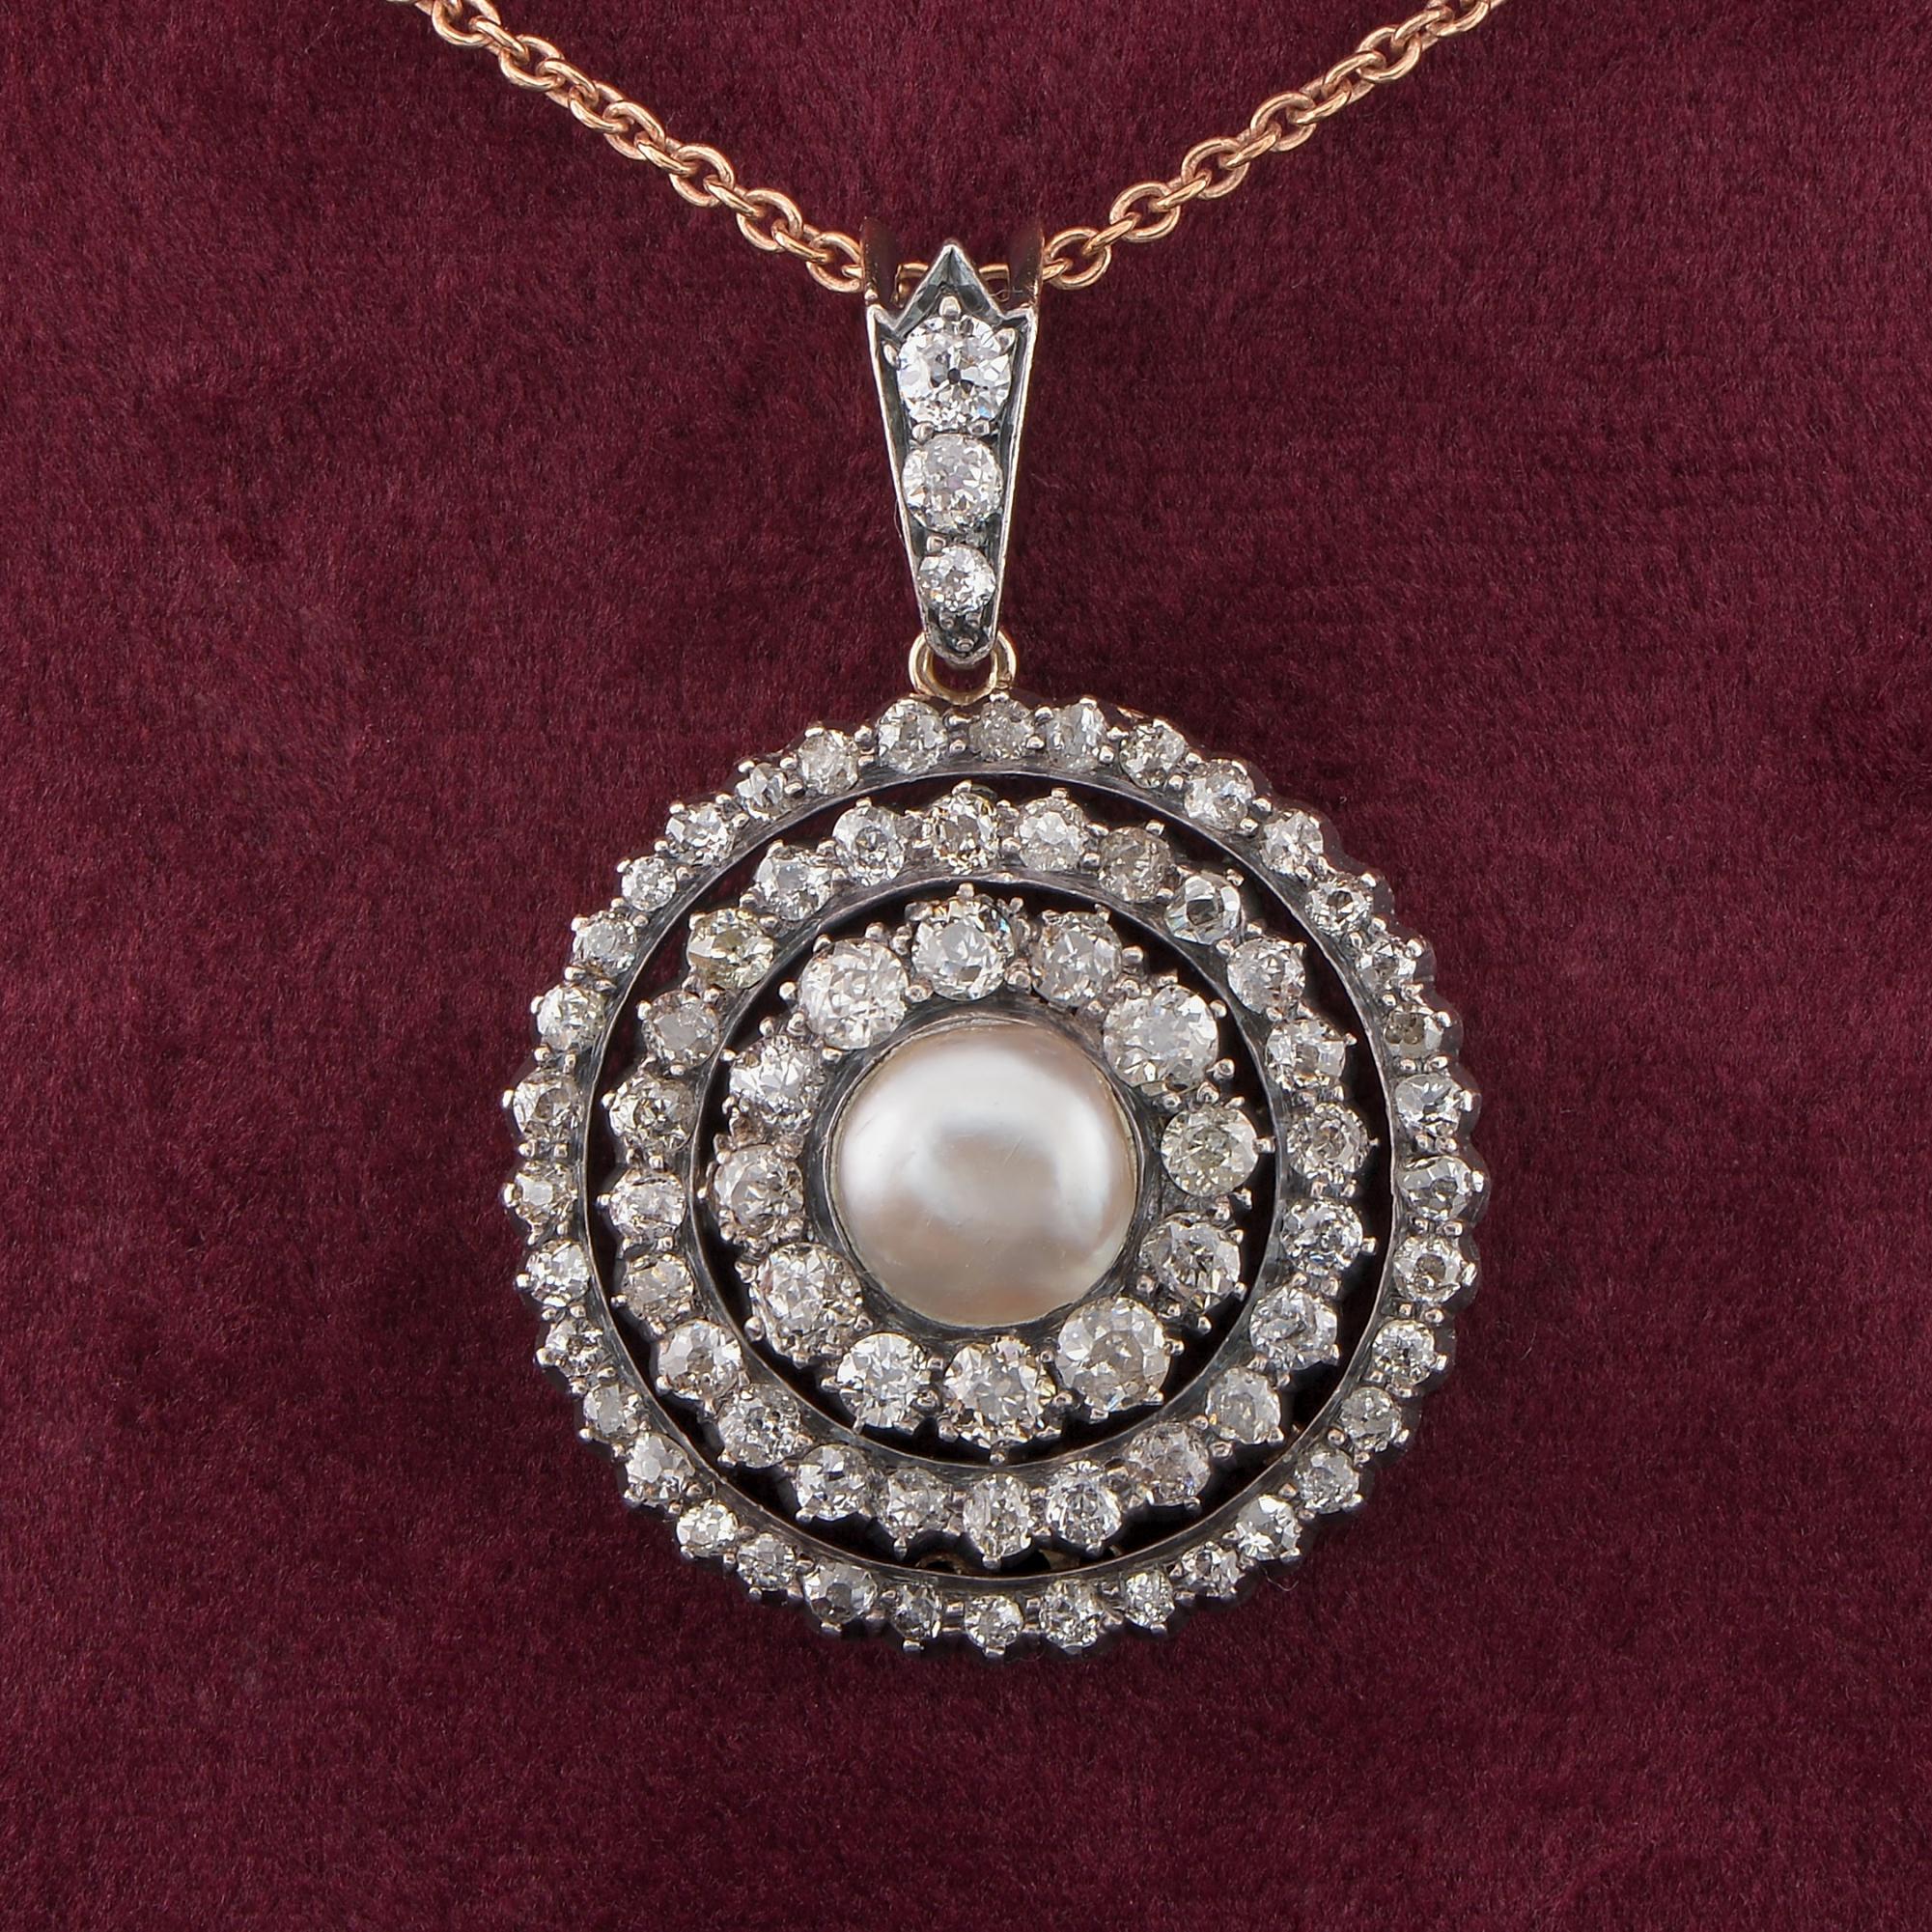 Women's Victorian Natural Pearl 4.60 Ct Old Mine Cut Diamond Brooch Pendant For Sale